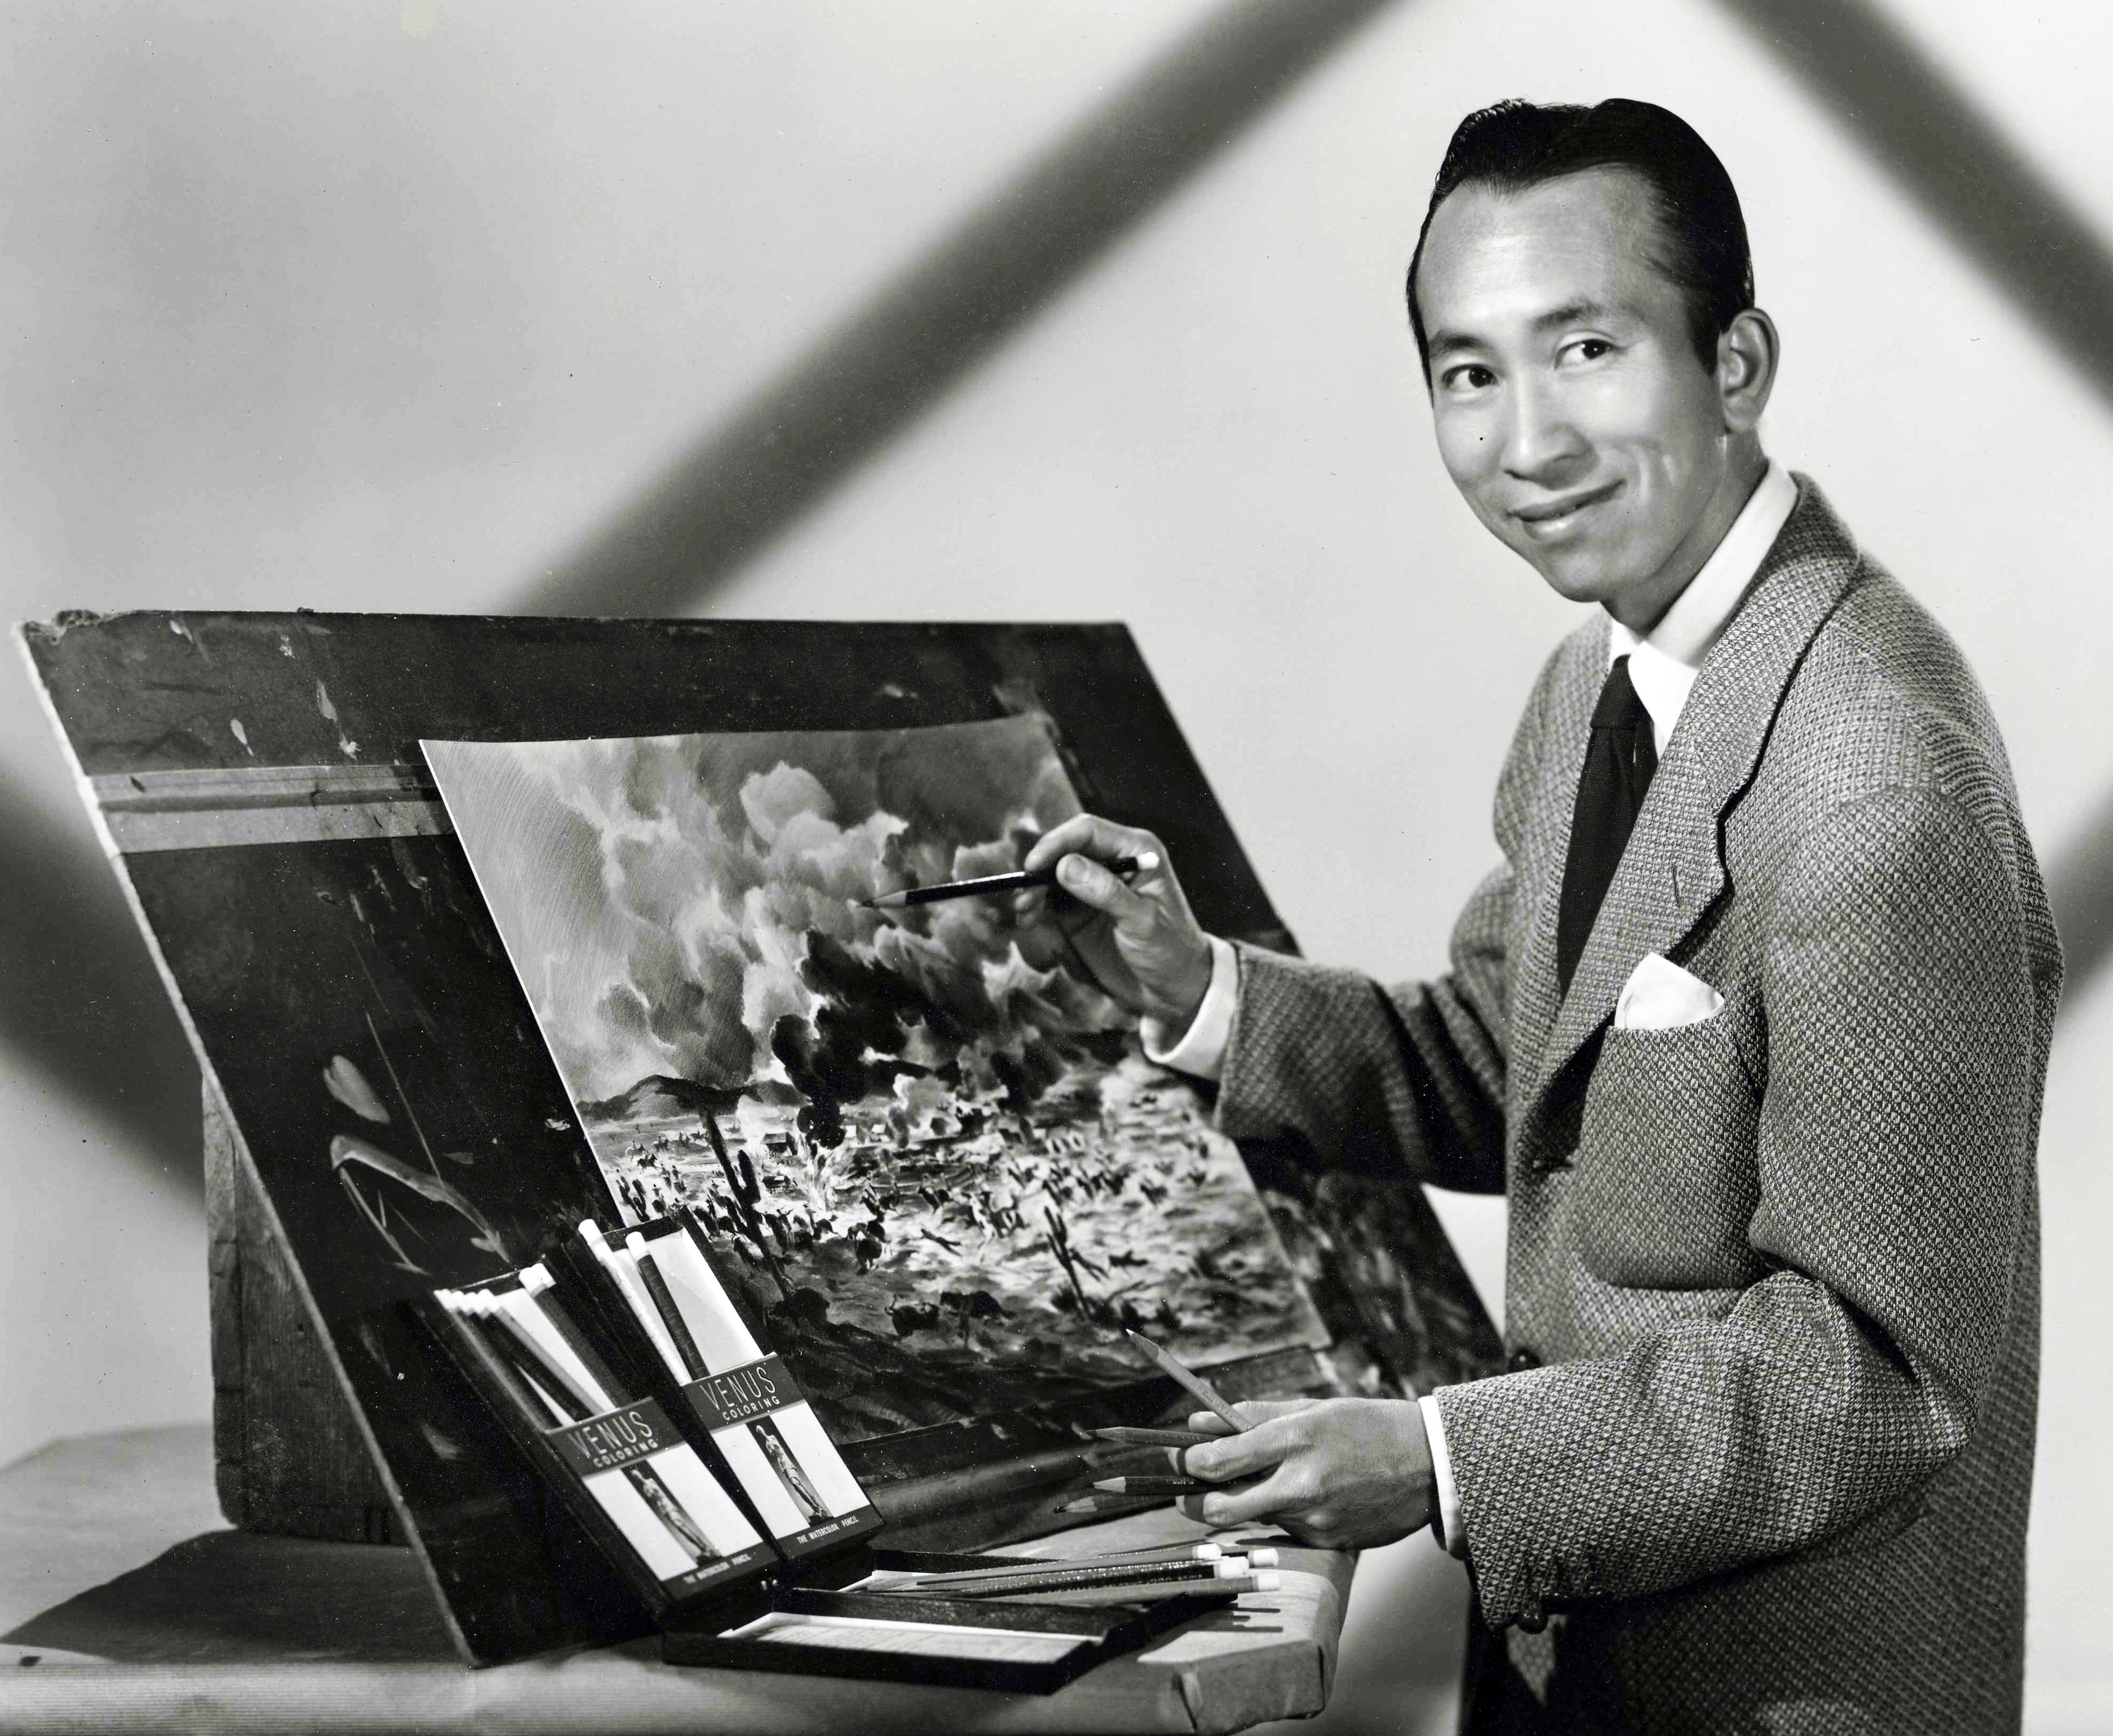 Tyrus Wong working on a Warner Bros western movie production Circa 1940s.